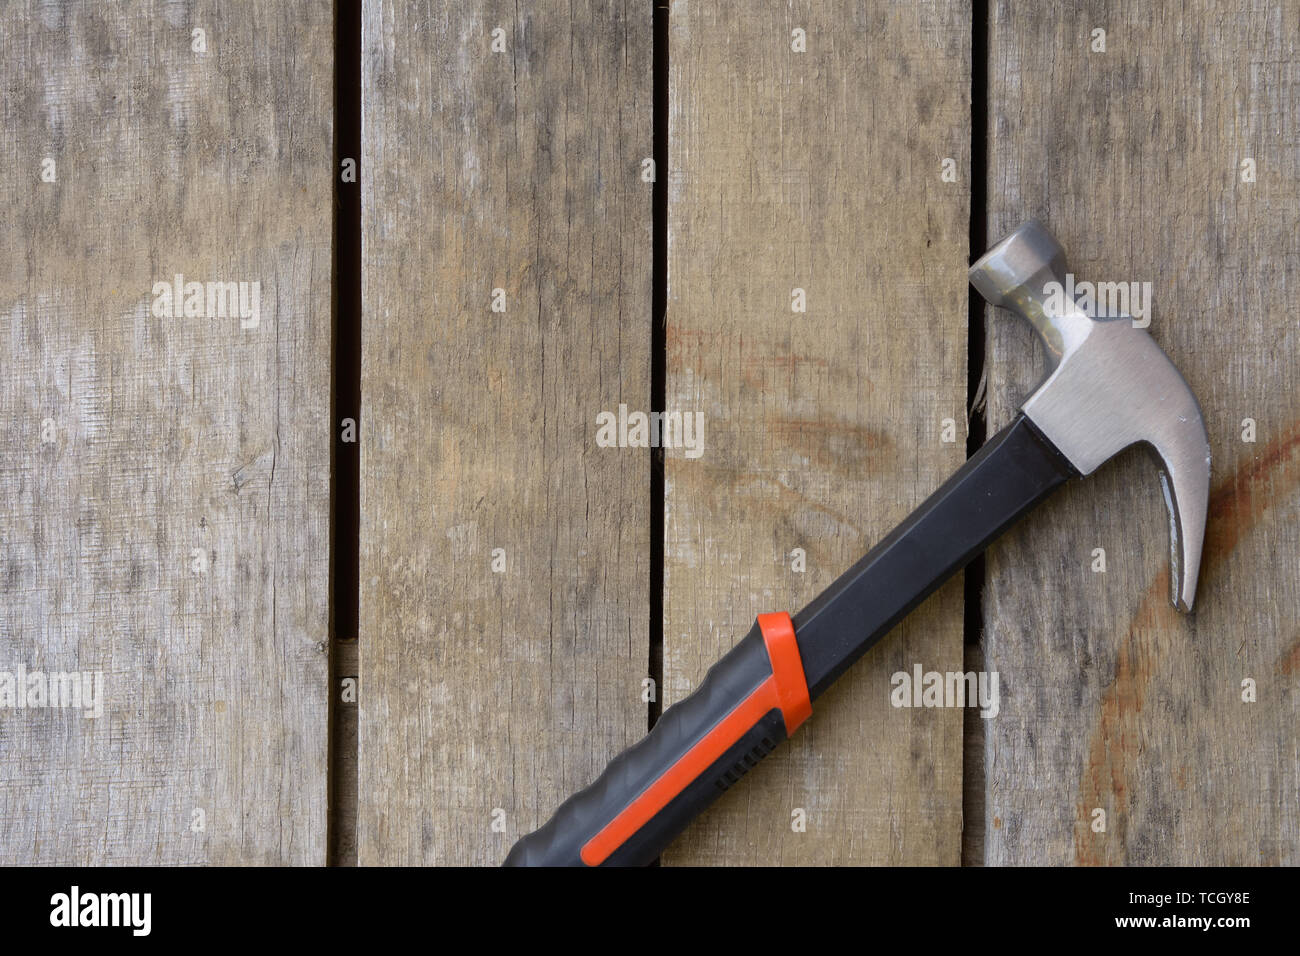 Hand tools used for construction or basic home repair Stock Photo - Alamy